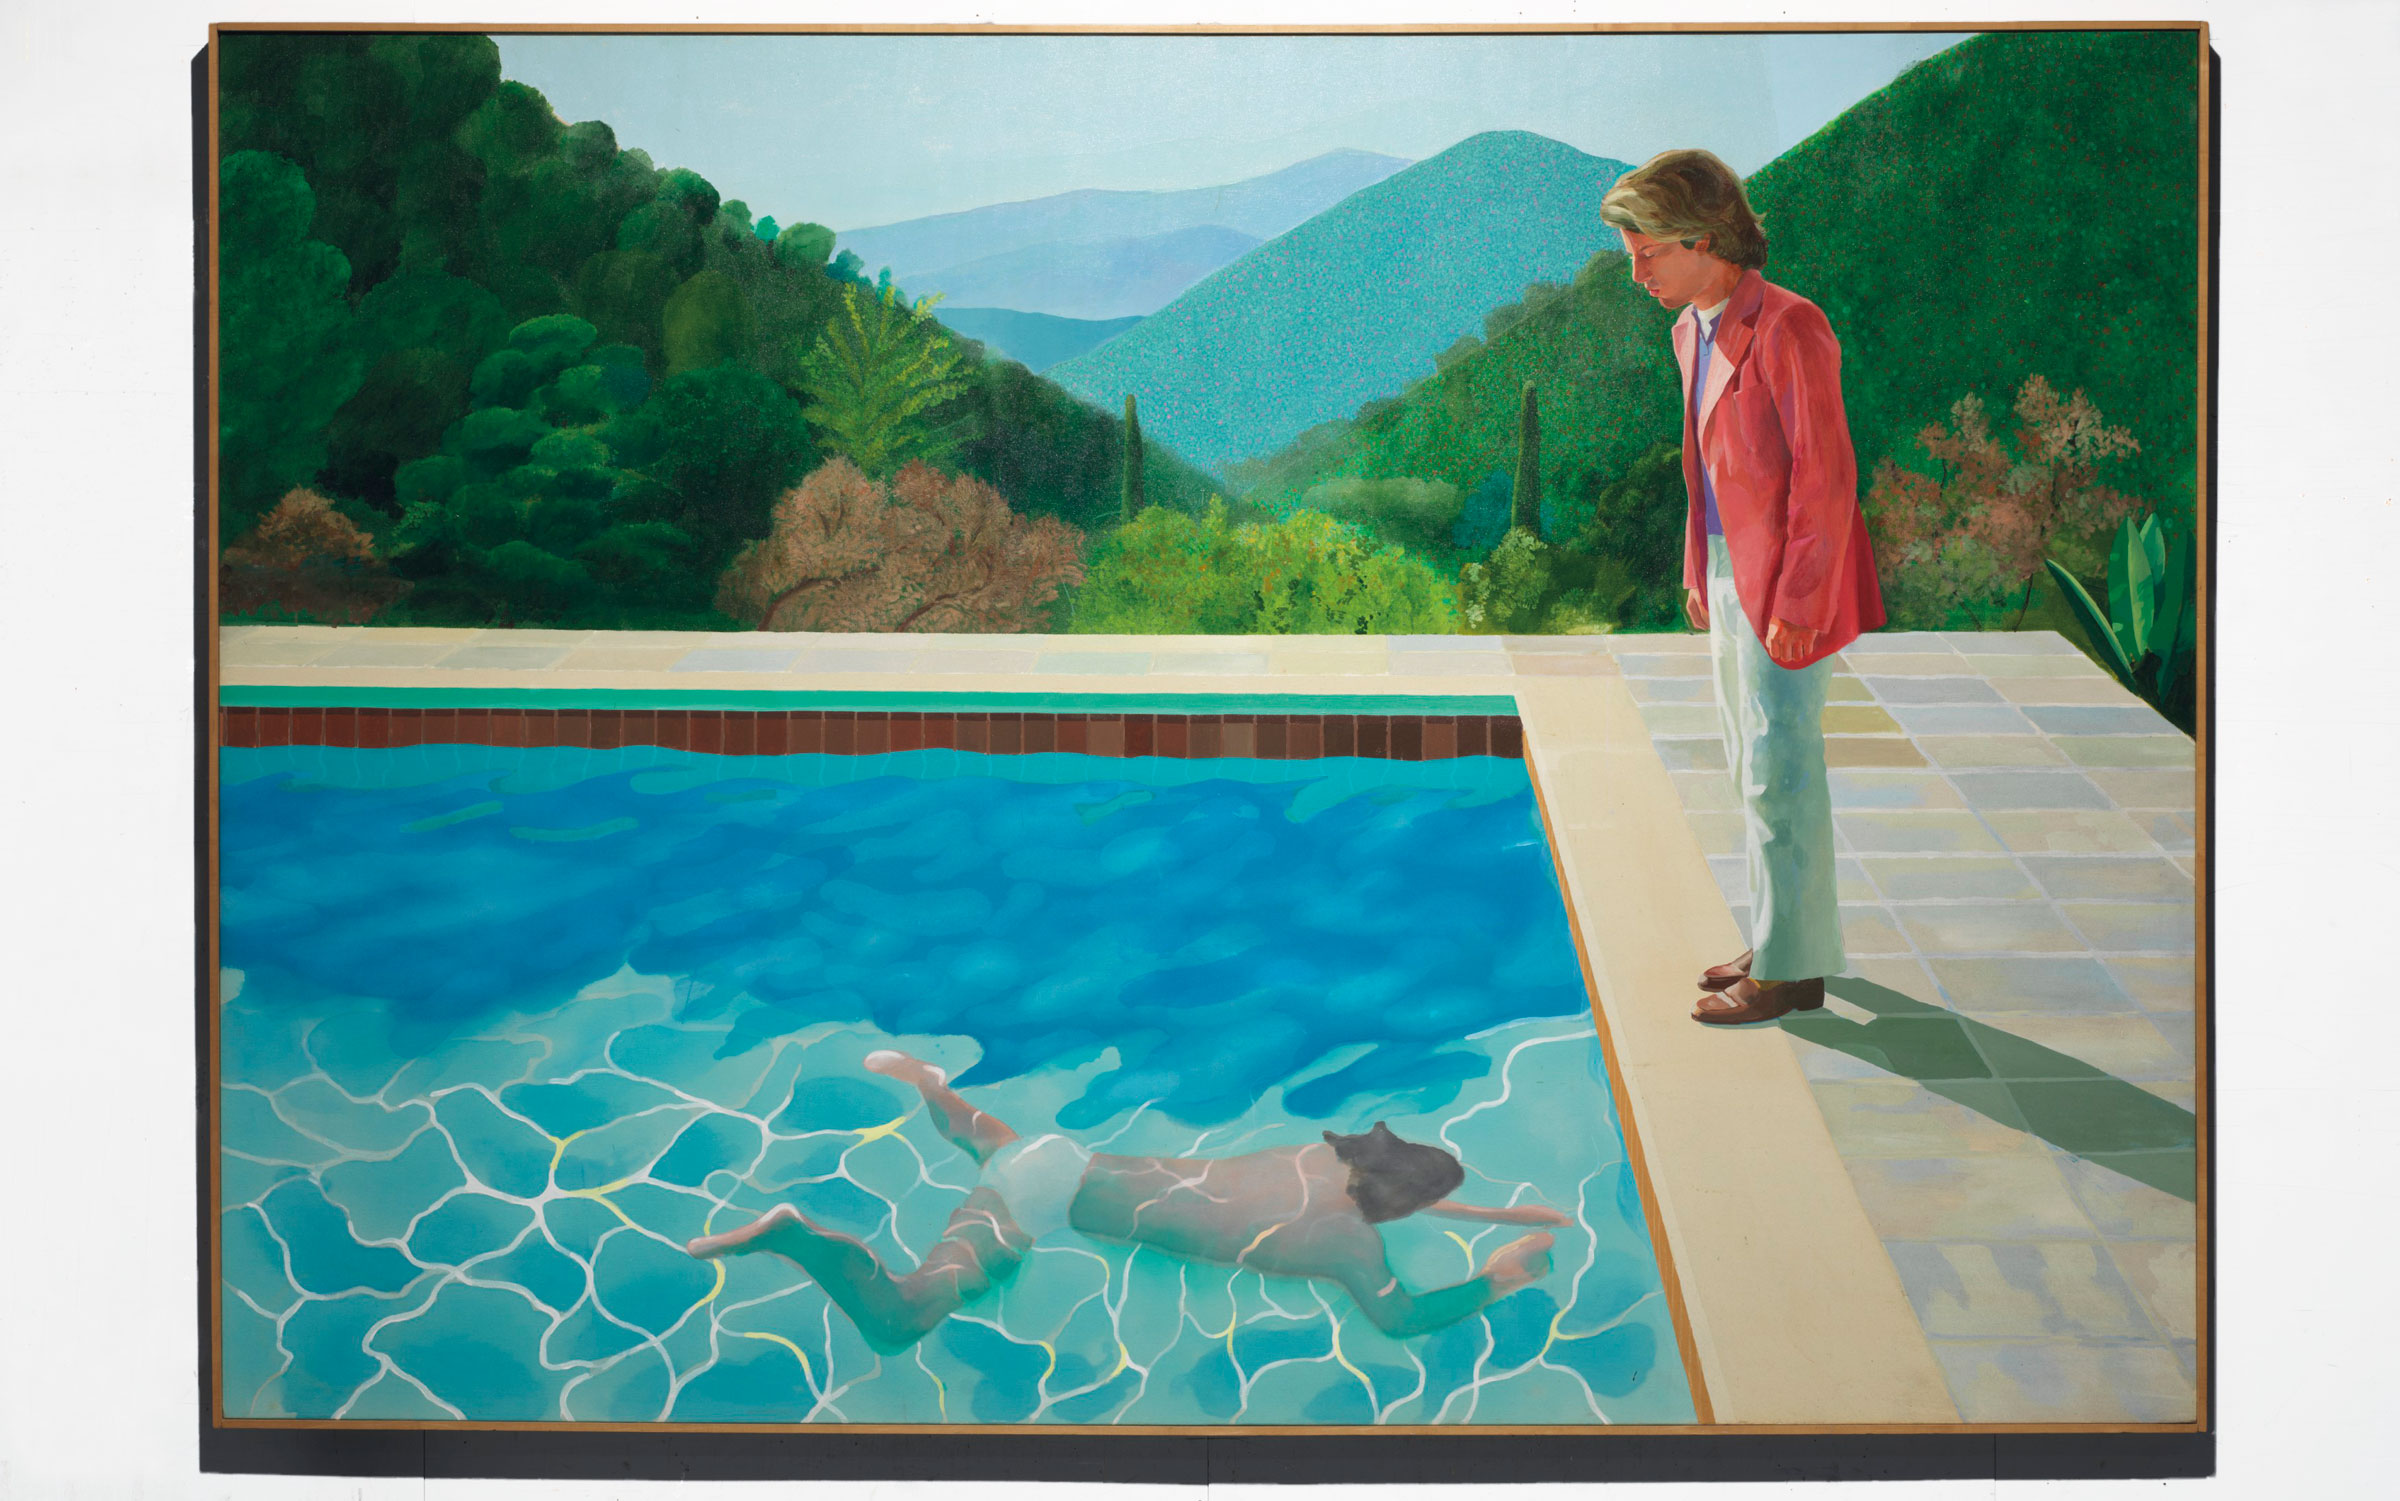 David Hockney, Portrait of an artist (Pool with two figures), 1972